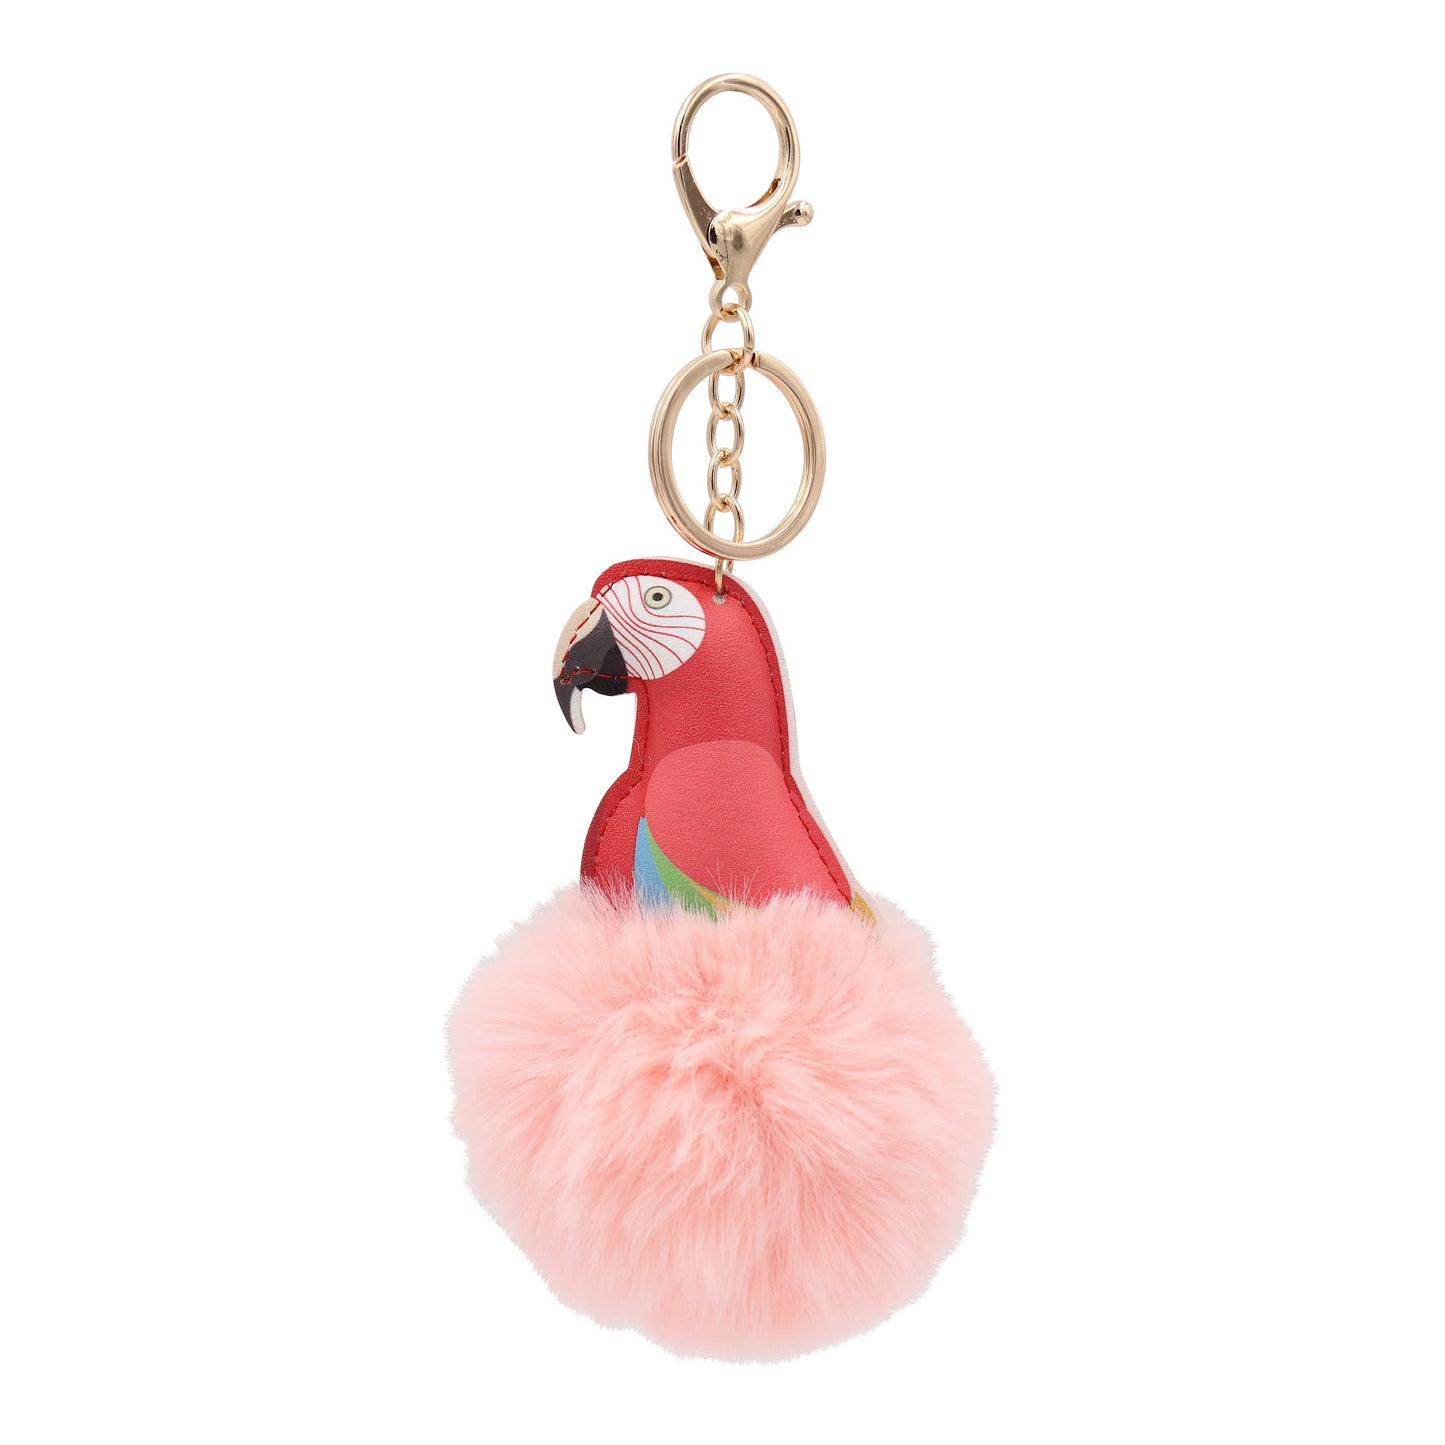 Image of Real Sic Pink Cute Colorful Parrots Pom Pom Key chain - Fuzzy Key chain